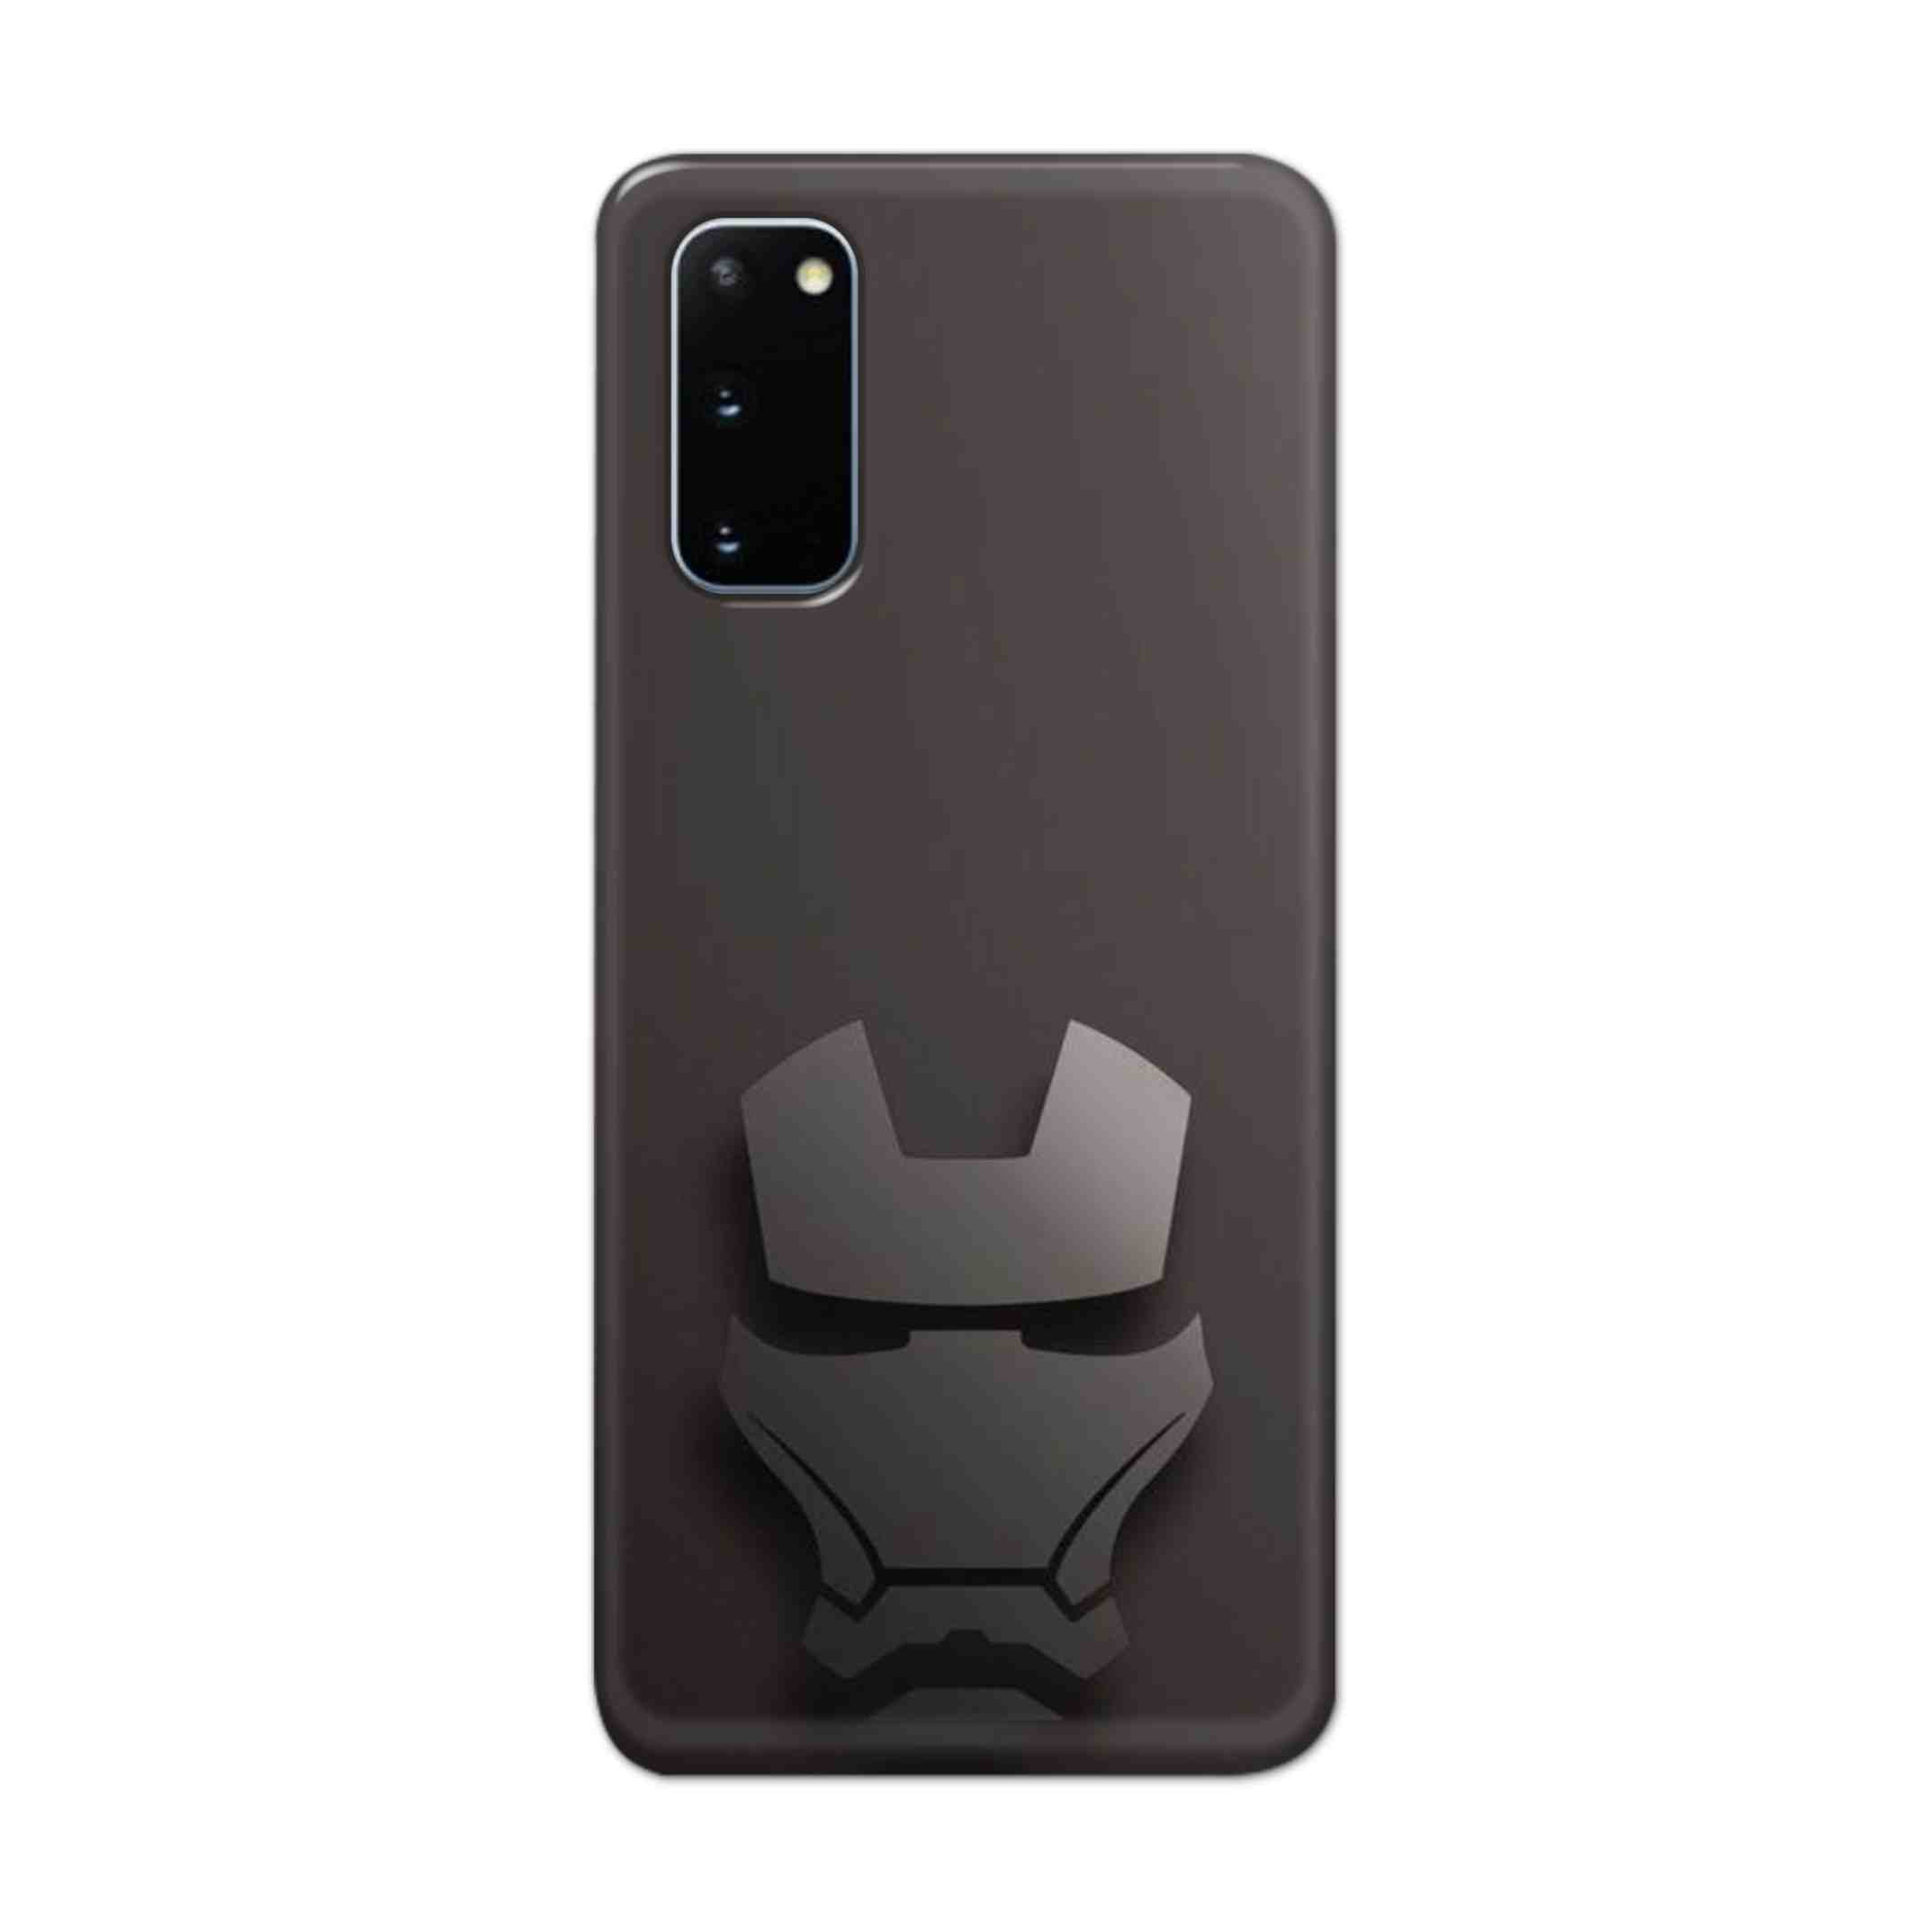 Buy Iron Man Logo Hard Back Mobile Phone Case Cover For Samsung Galaxy S20 Online